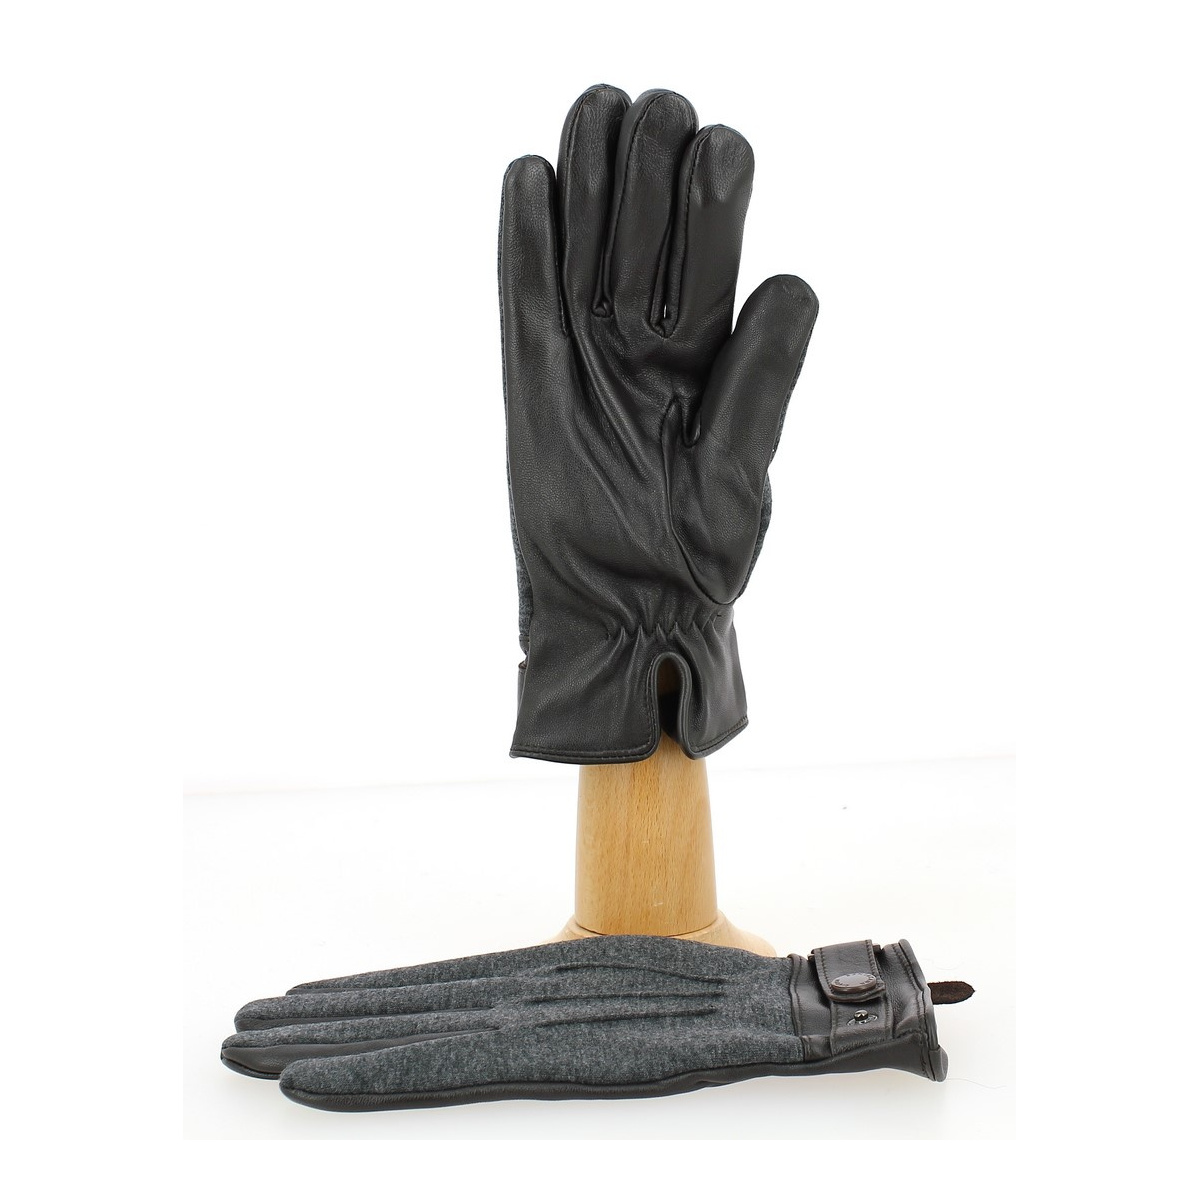 Gants Tactiles Homme Cuir Marron & Gris- Traclet Reference : 9859